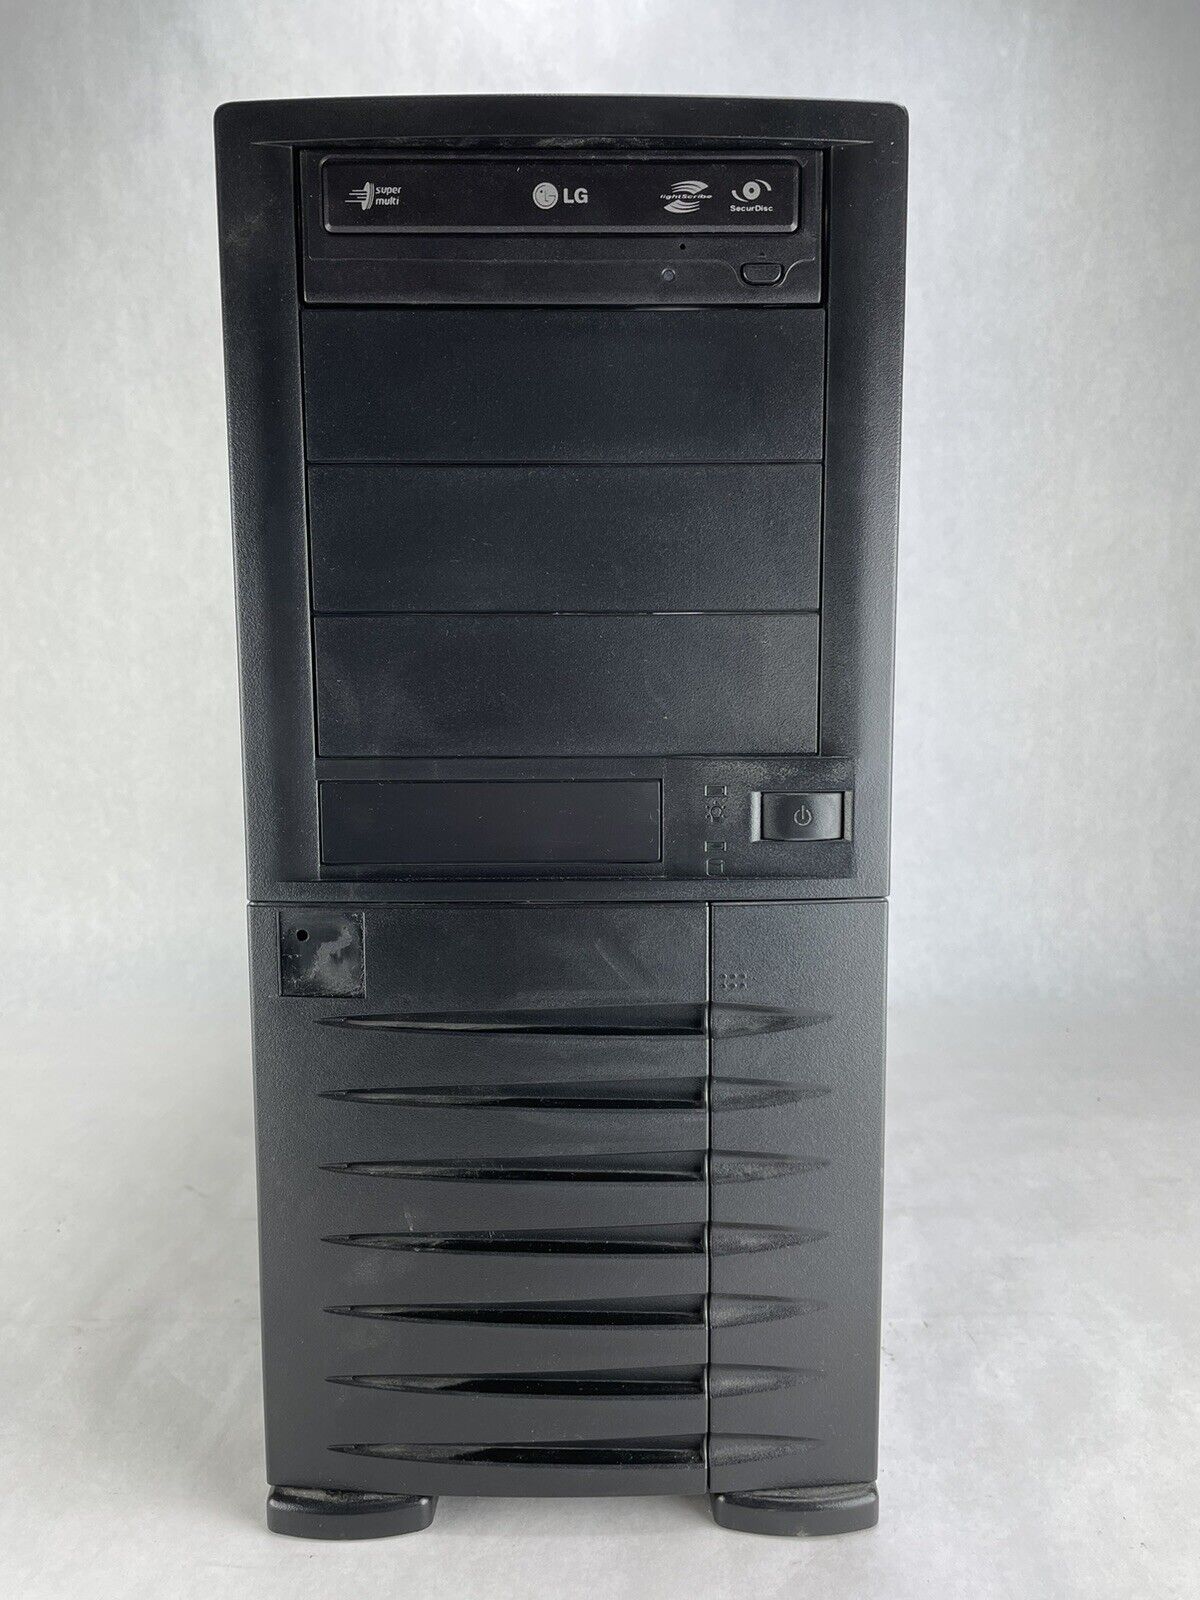 NEC S|1520 Server Chassis Full ATX Computer Case